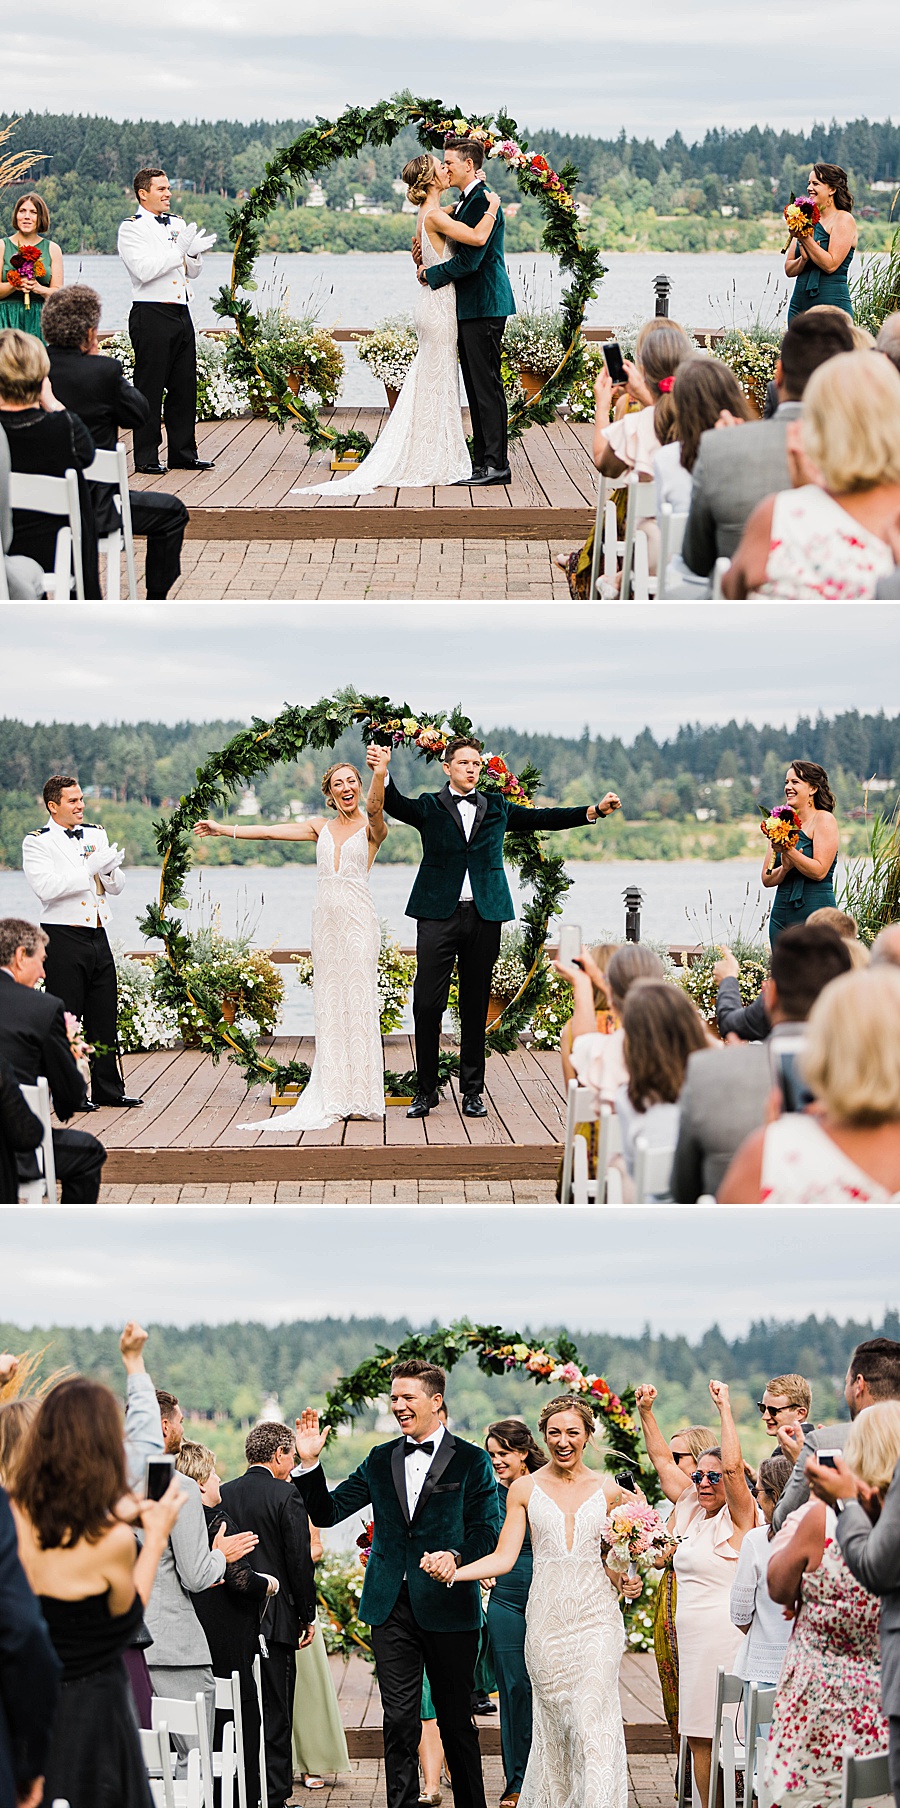 A bride and groom enjoy their first kiss and recessional at their Kiana Lodge wedding, photographed by Seattle outdoor wedding photographer Amy Galbraith